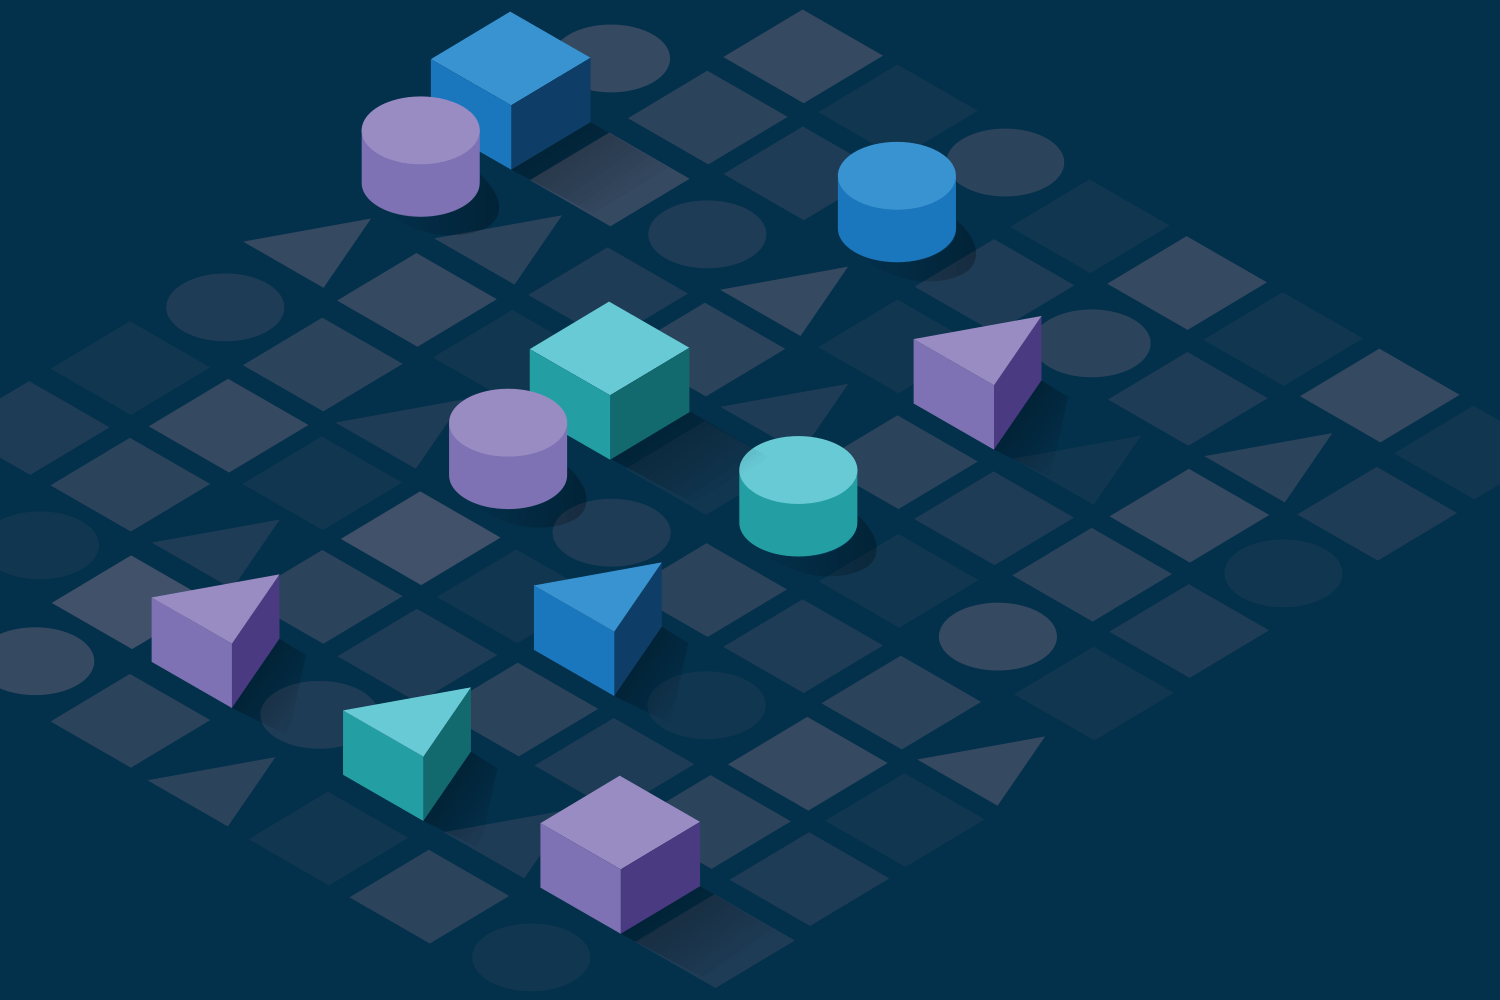 Cubes, cylinders and triangles on a three dimensional grid